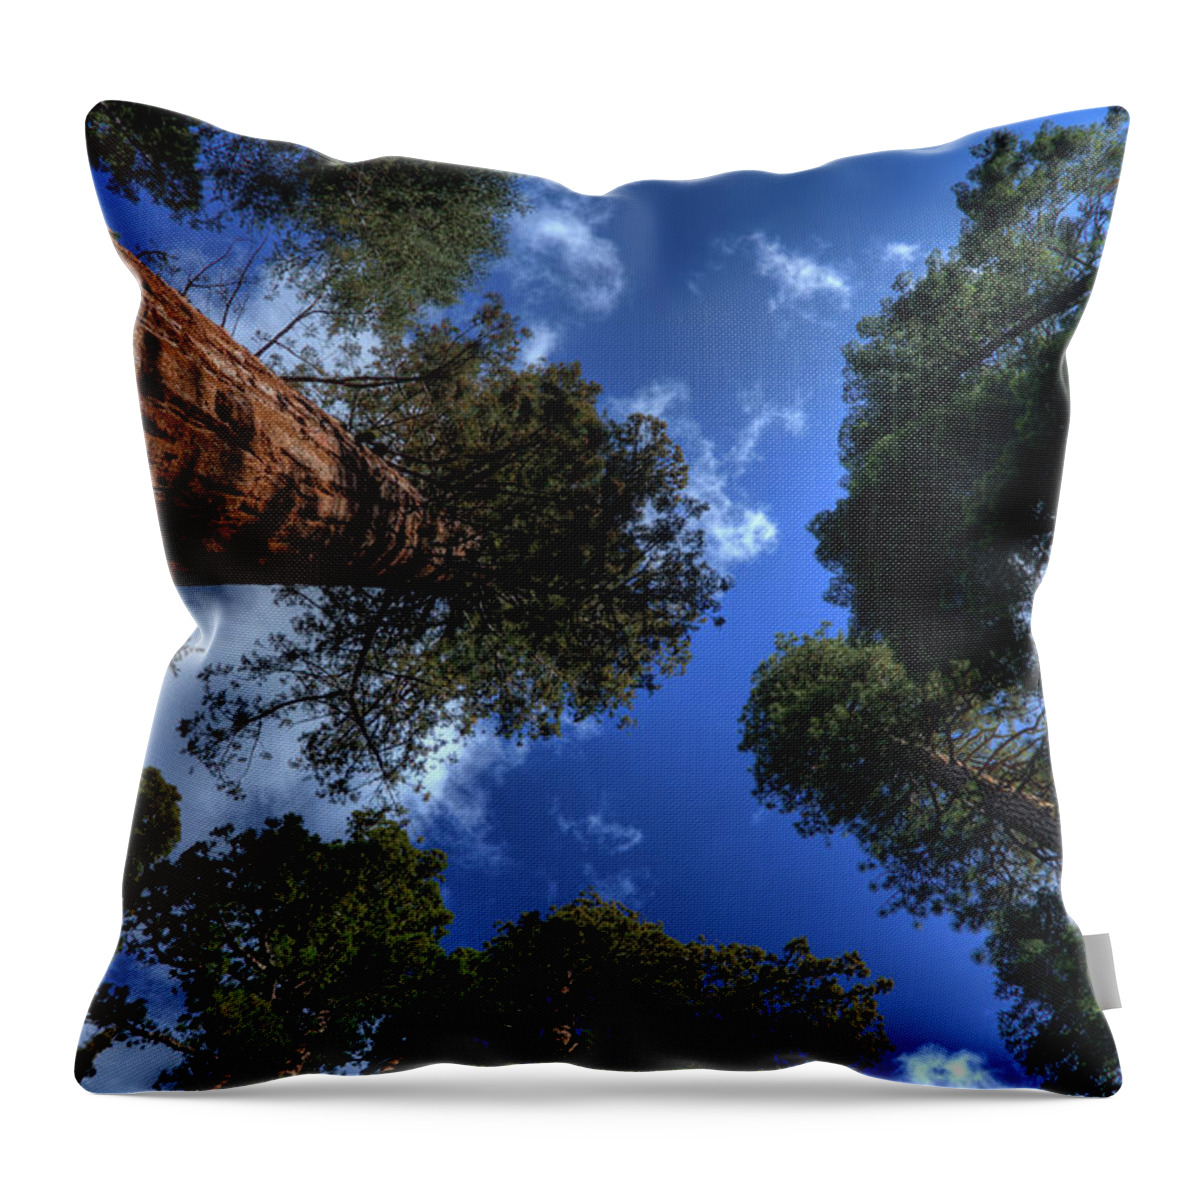 Sequoia Tree Throw Pillow featuring the photograph Giant Sequoias - 2 by Rhyman007